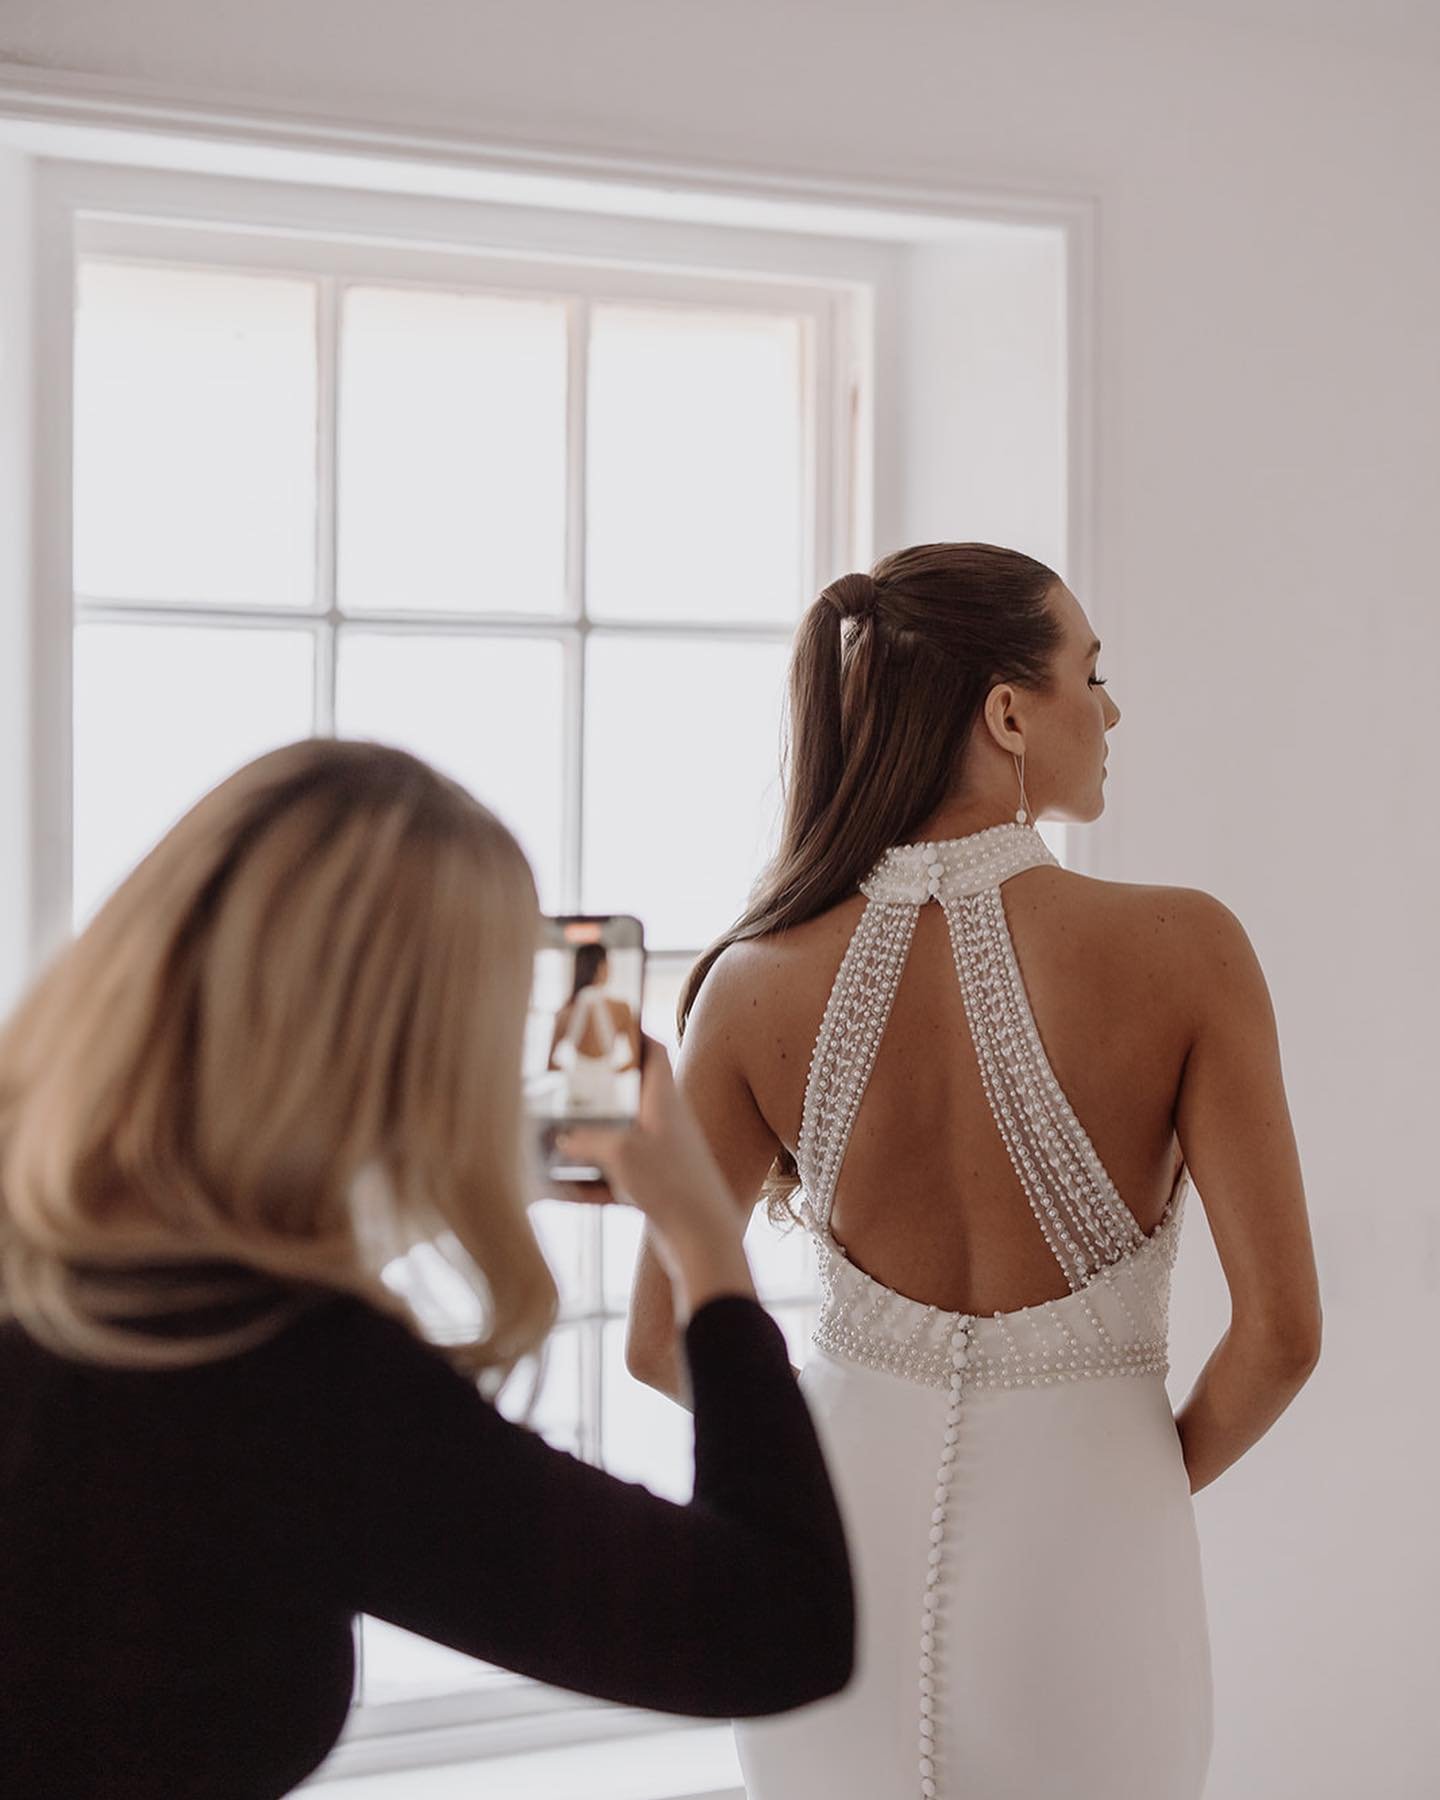 C A M E R O N

📷 @melissameganphotography 
makeup @alicebraypromakeup 
hair @styledby.jas__ 
boutique &amp; styling @laurenfrancisbridal 

Adorned with iconic Anna Campbell intricate hand-embellishments, its linear design is nothing short of captiva